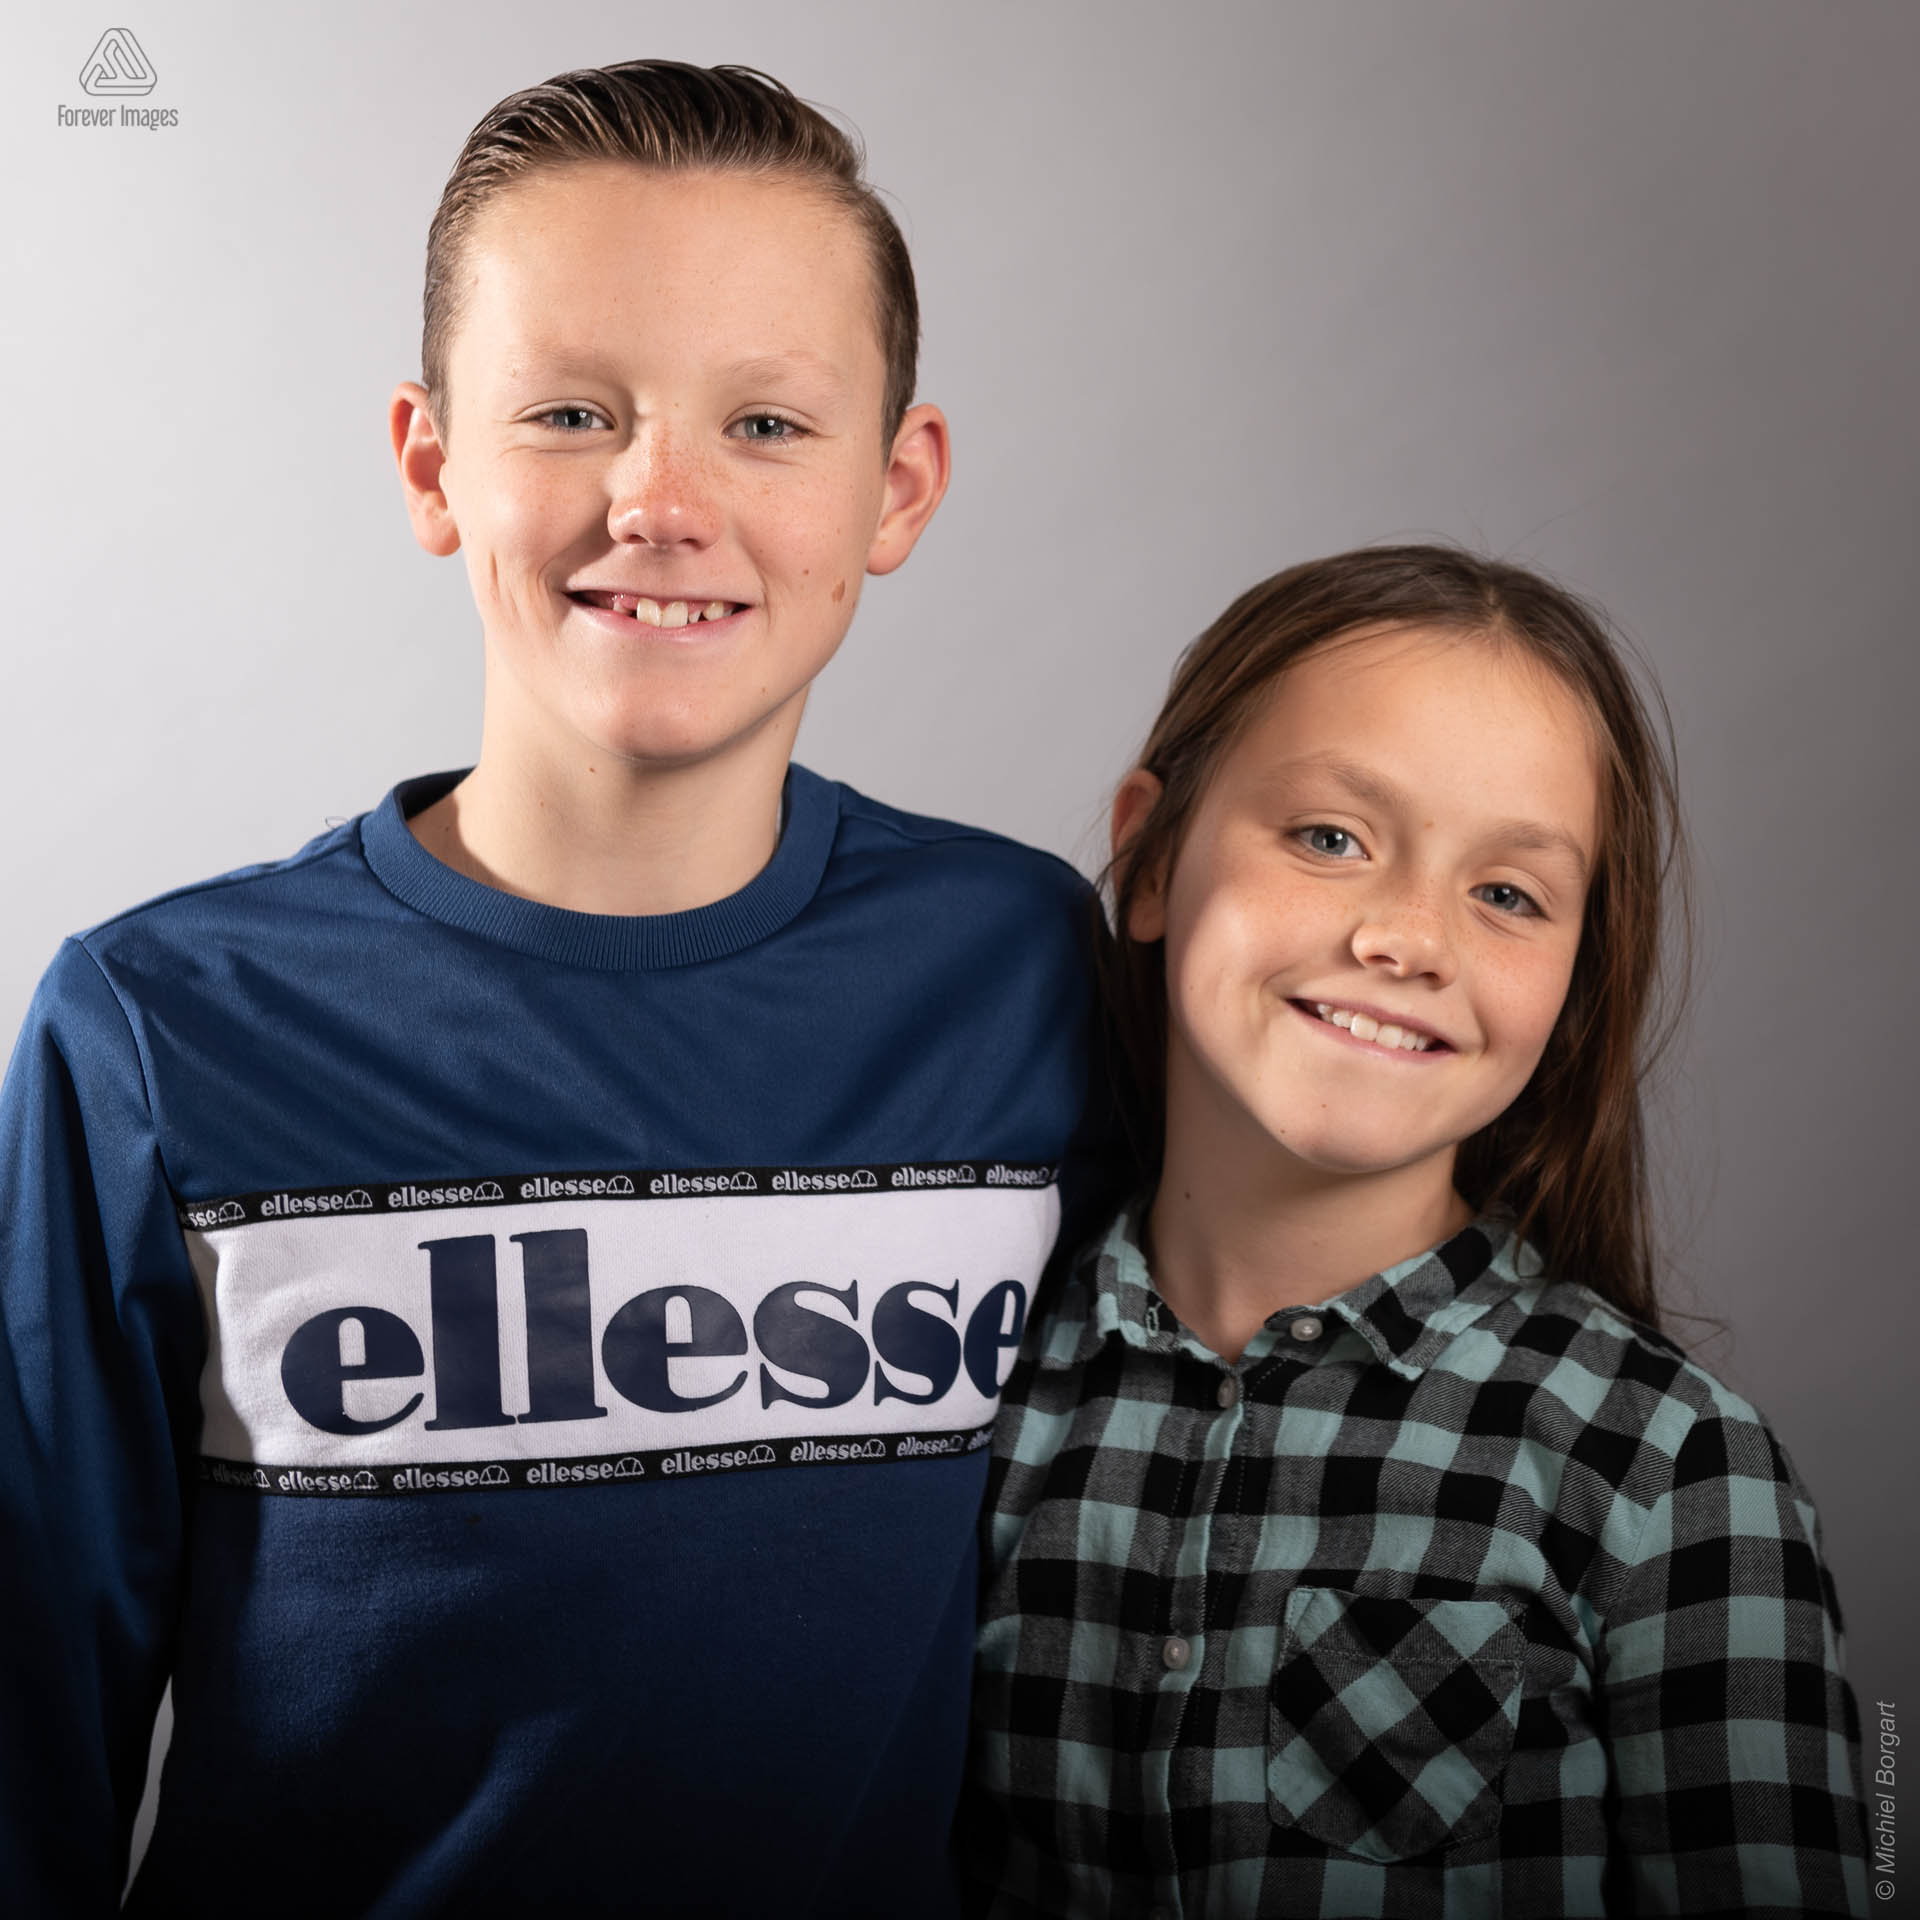 Portrait photo of a big brother with sister by his side | Portrait Photographer Michiel Borgart - Forever Images.